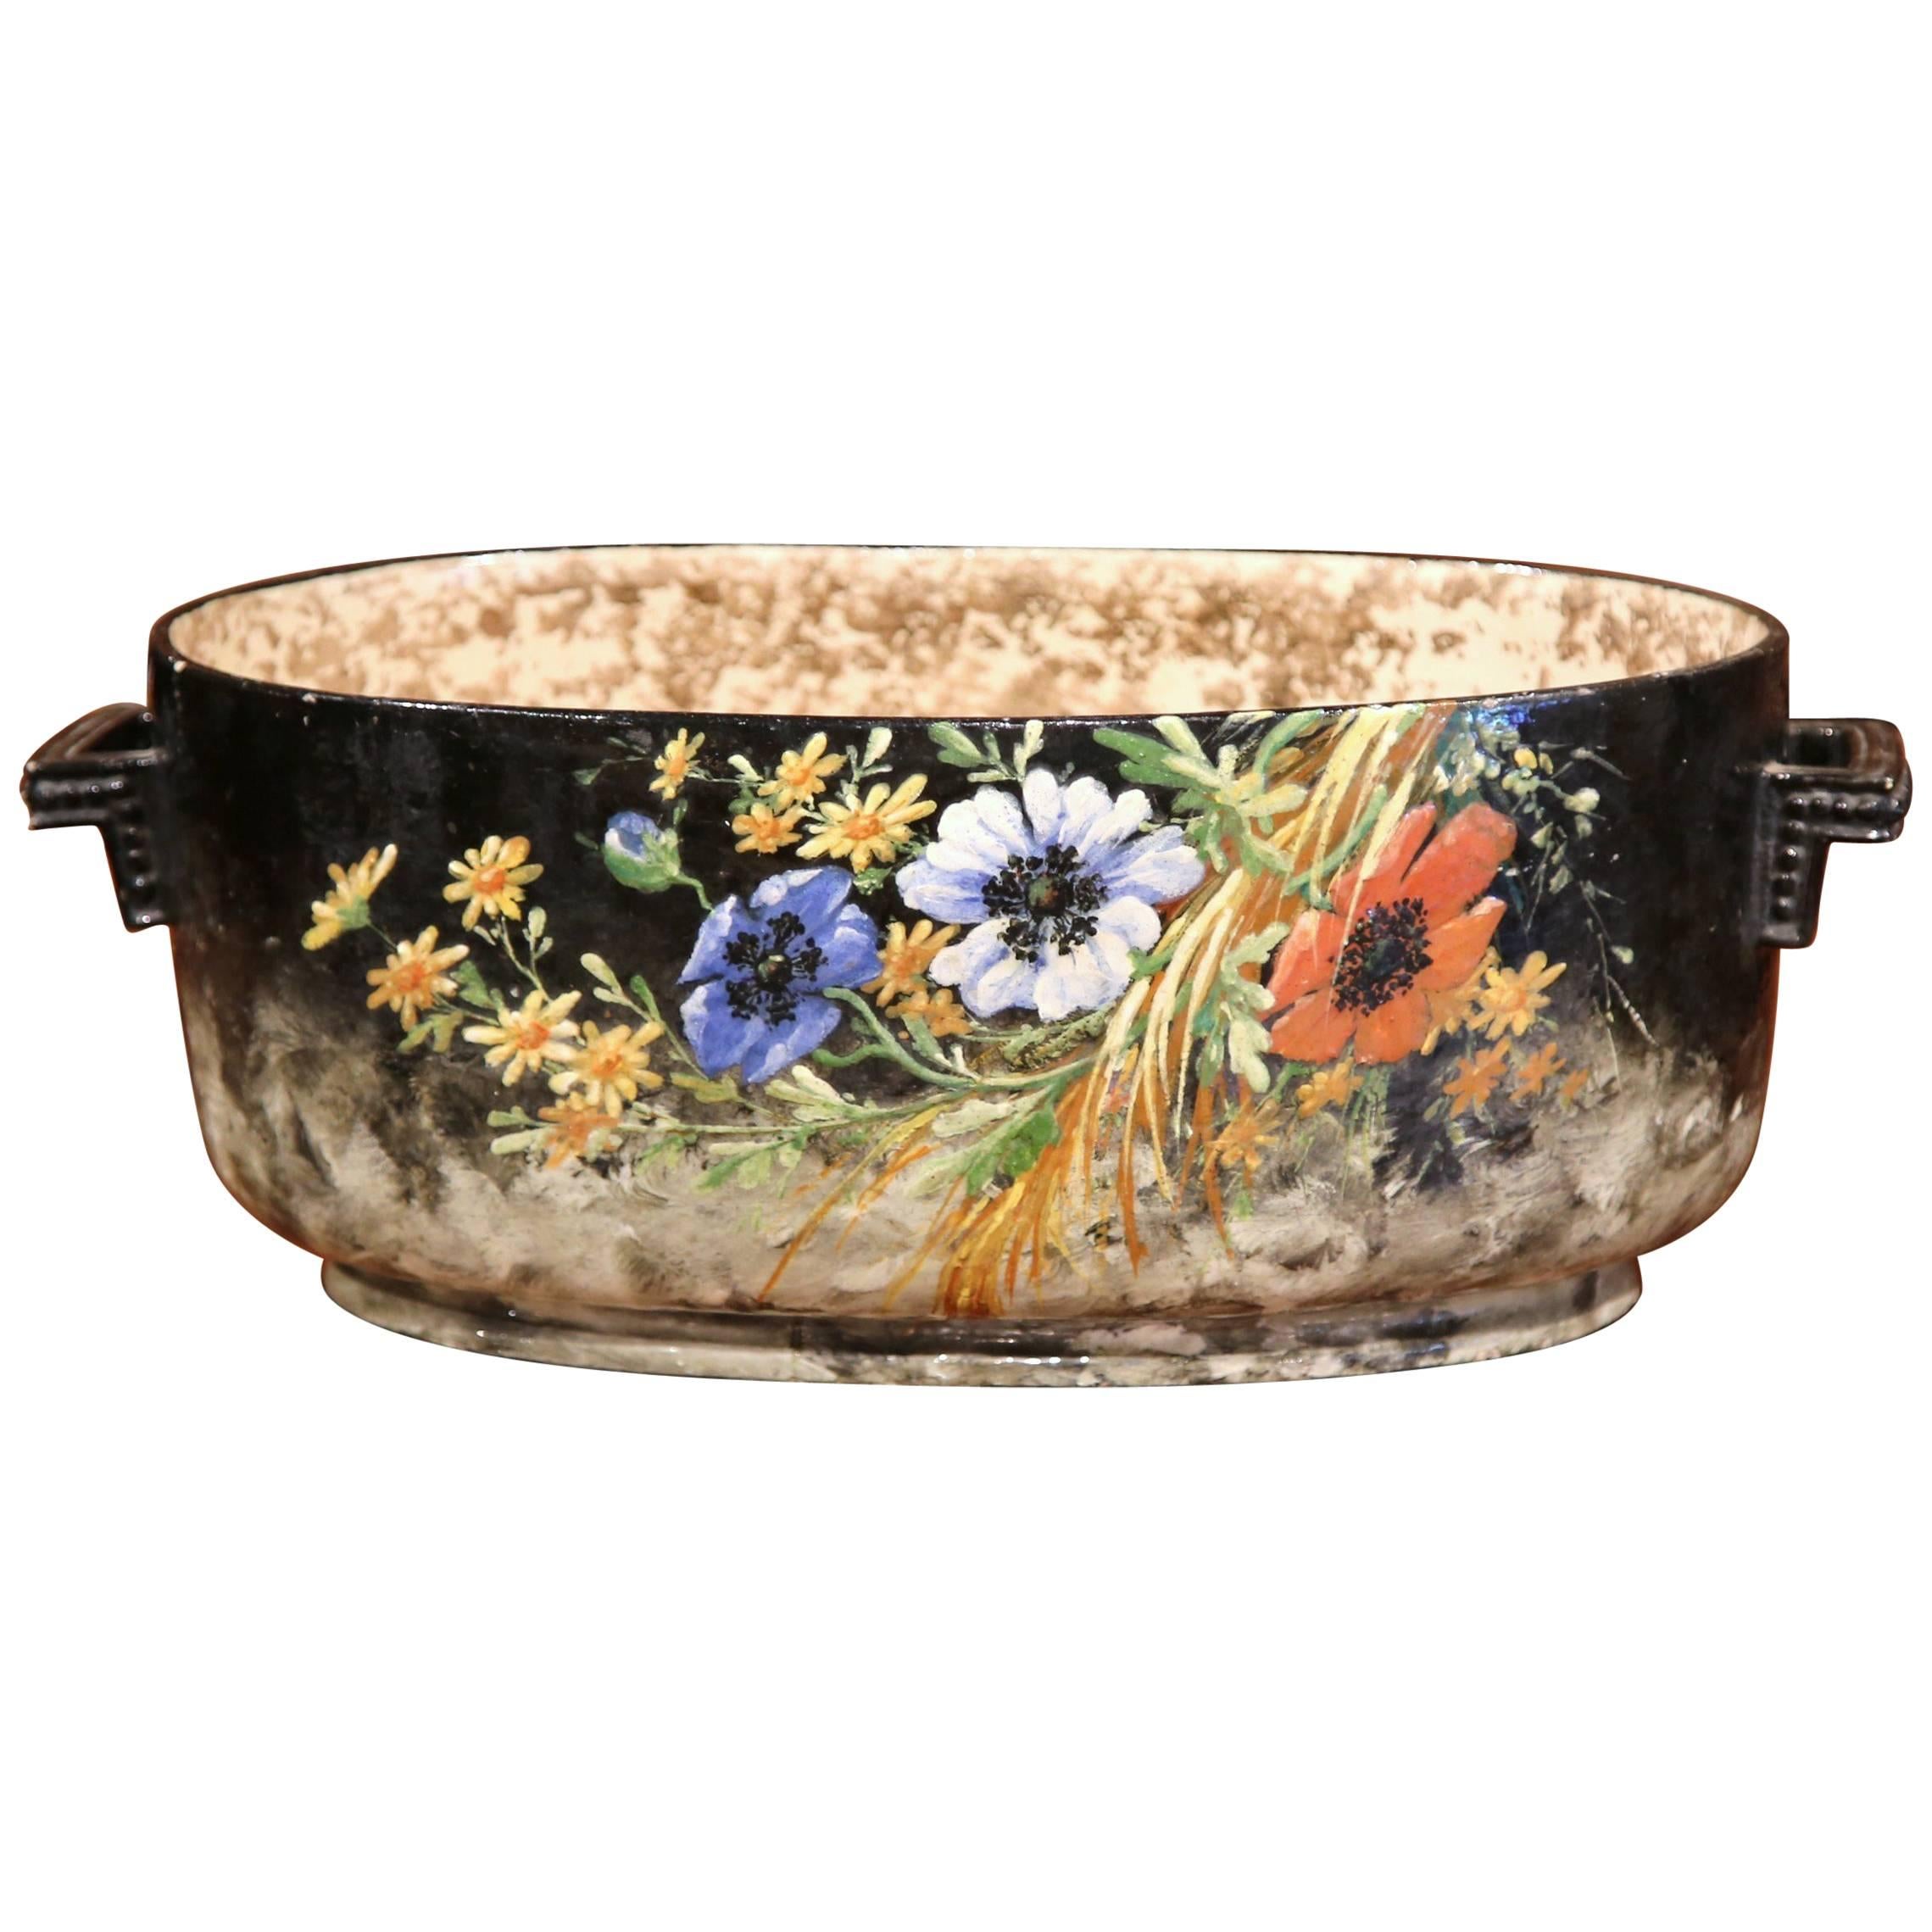 Early 20th Century, French, Hand-painted Jardinière from Montigny-sur-Loing